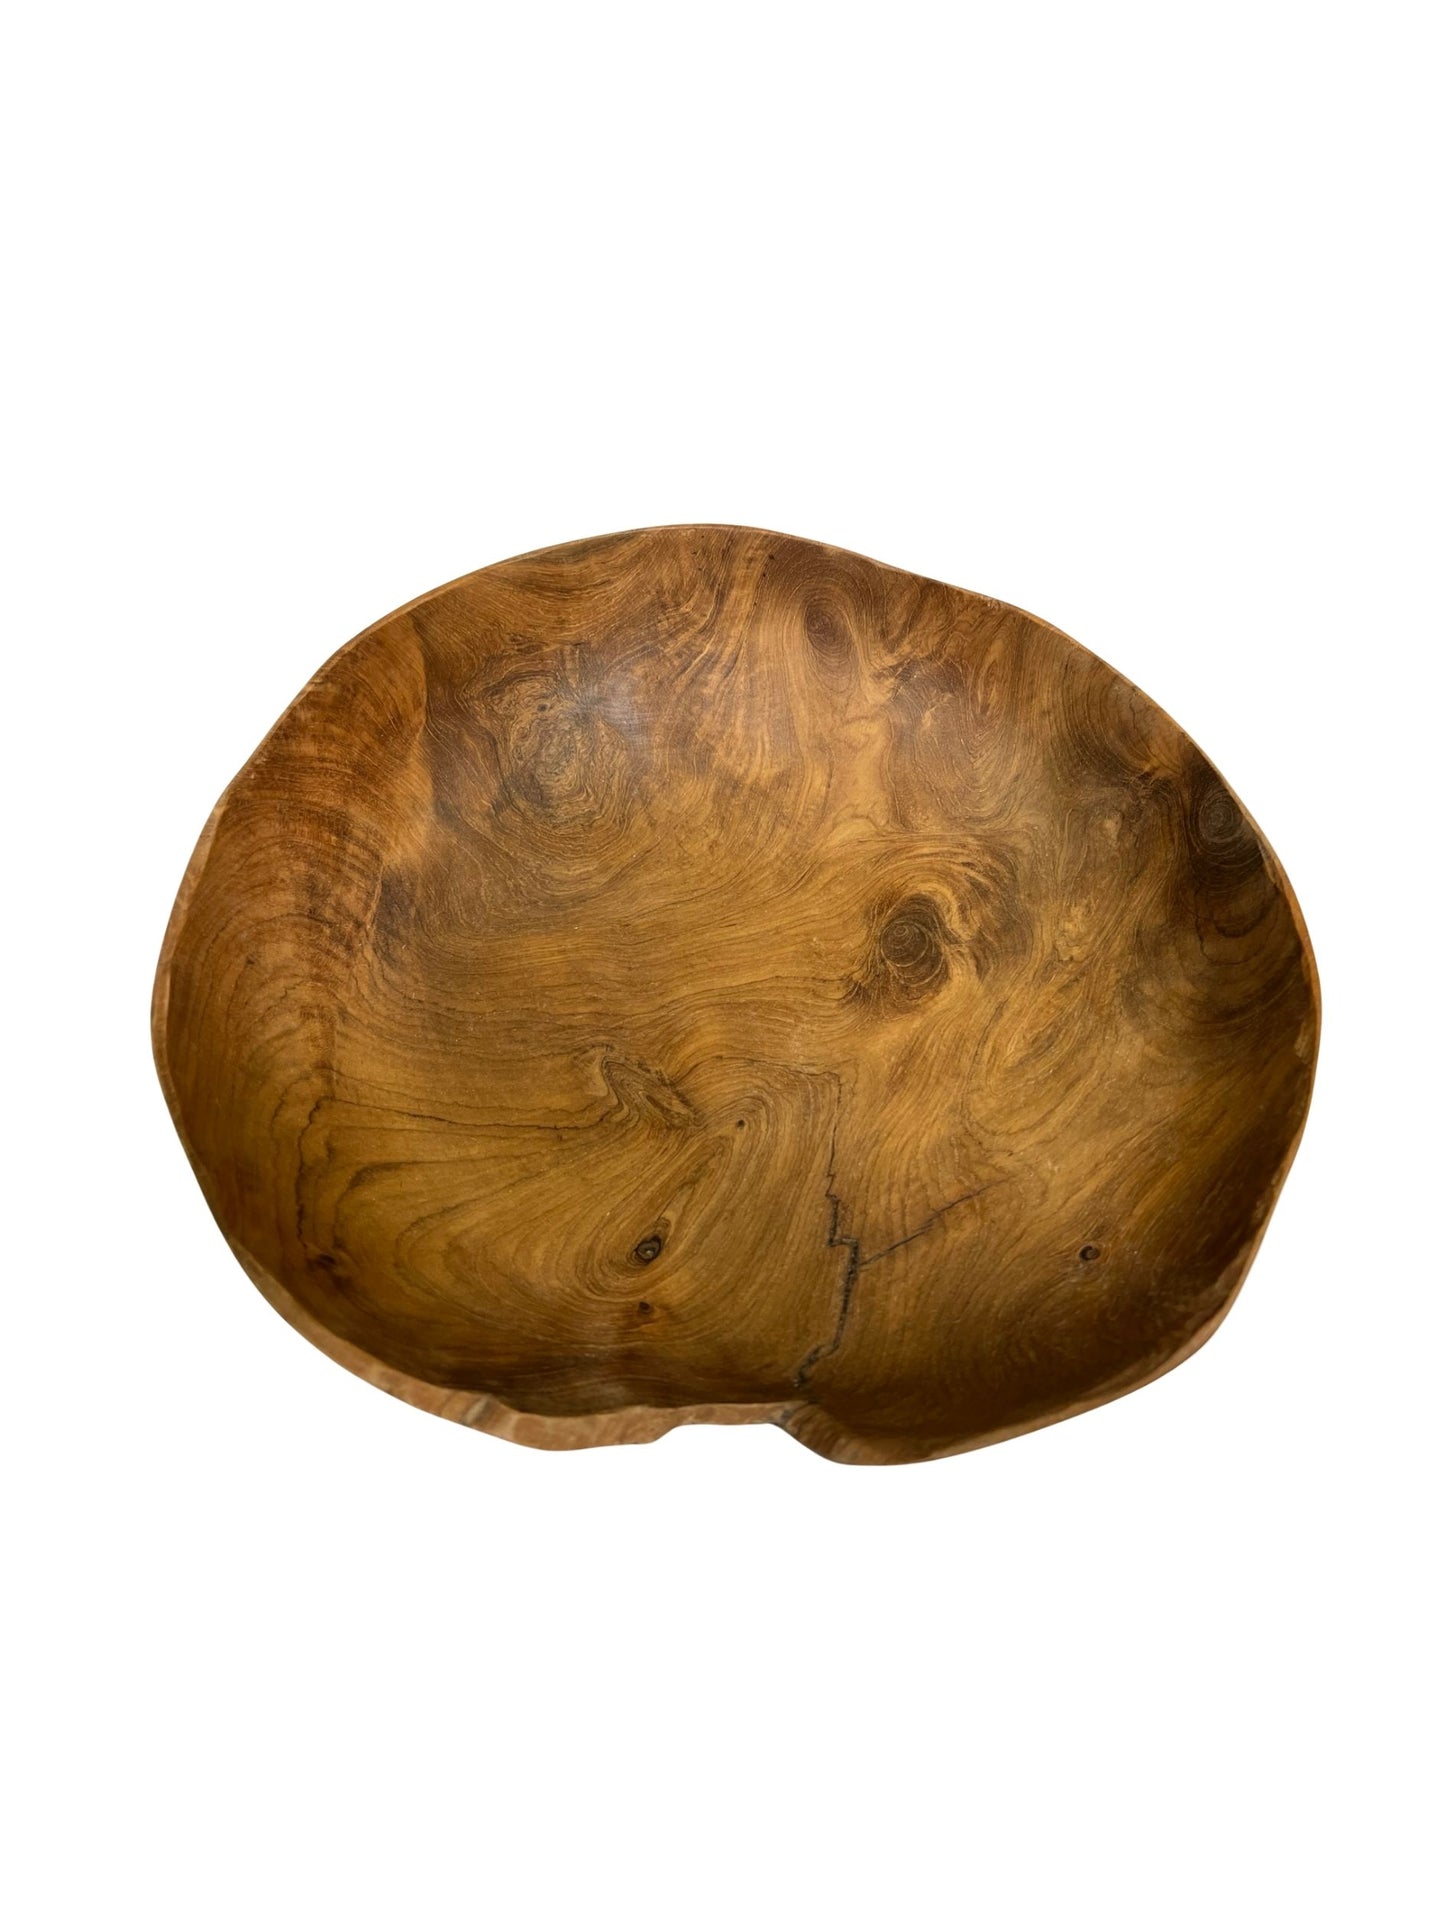 Eclectic Home Accent Shallow Teak Bowl 2947 Natural  Decor Furniture